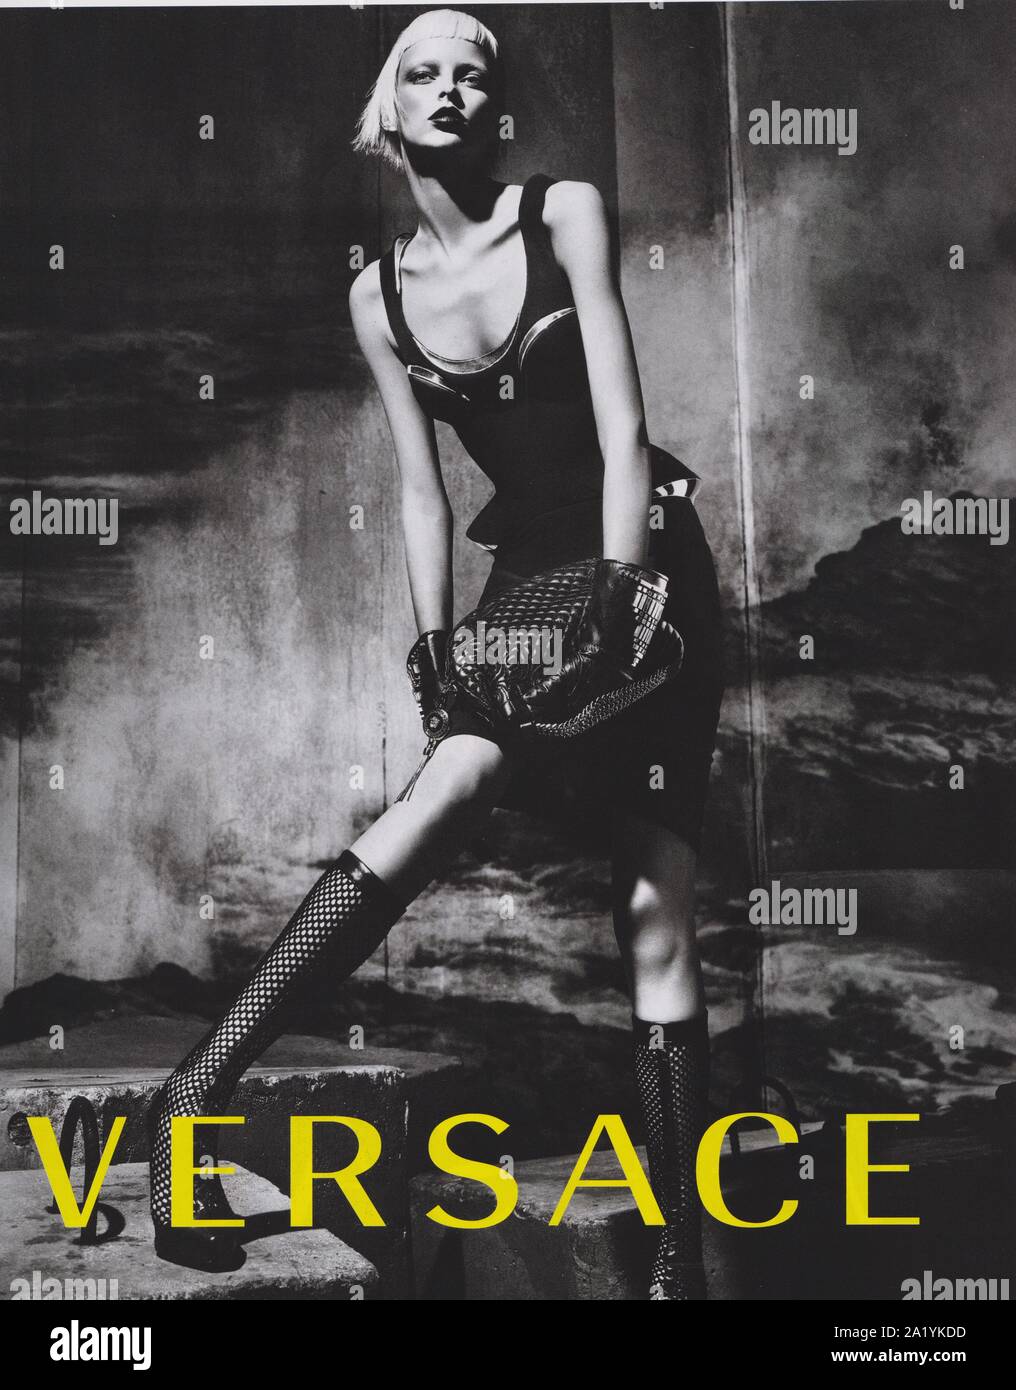 poster advertising VERSACE fashion house with Elza Luijendijk in paper  magazine from 2012 year, advertisement, creative VERSACE advert from 2010s  Stock Photo - Alamy